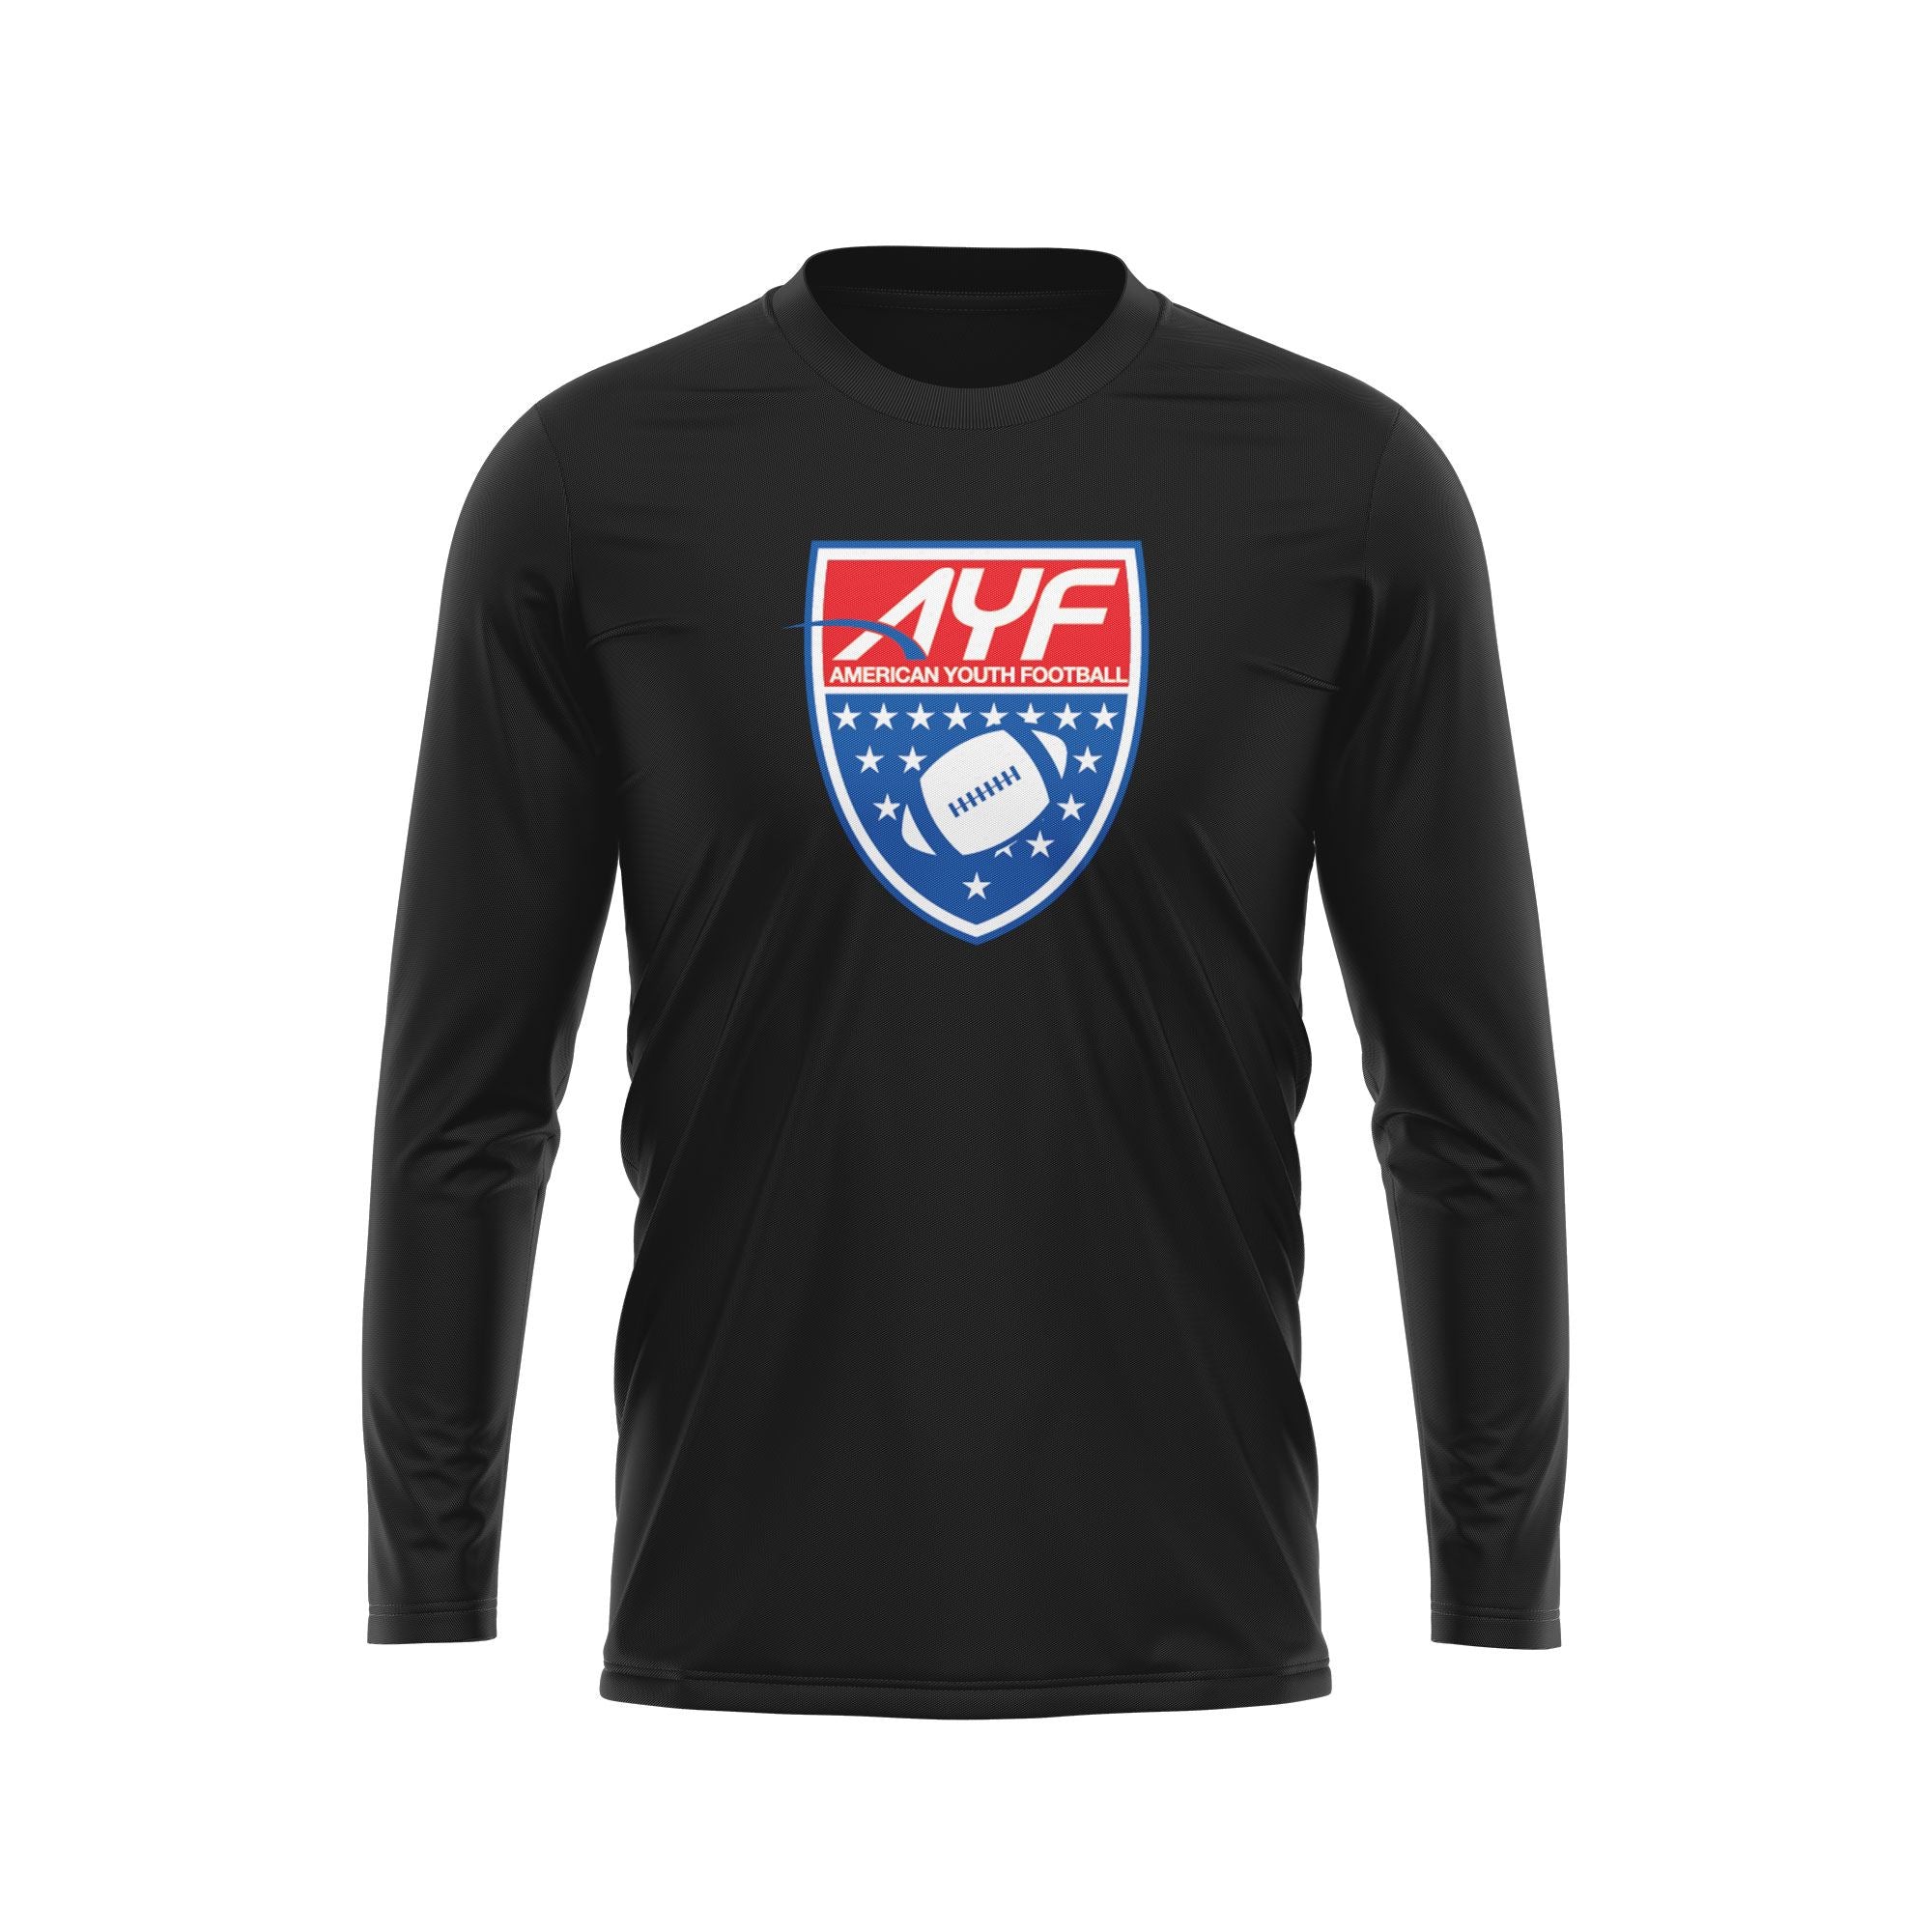 AYF Full Dye Sublimated Long Sleeve Crew Neck (6 Colors)